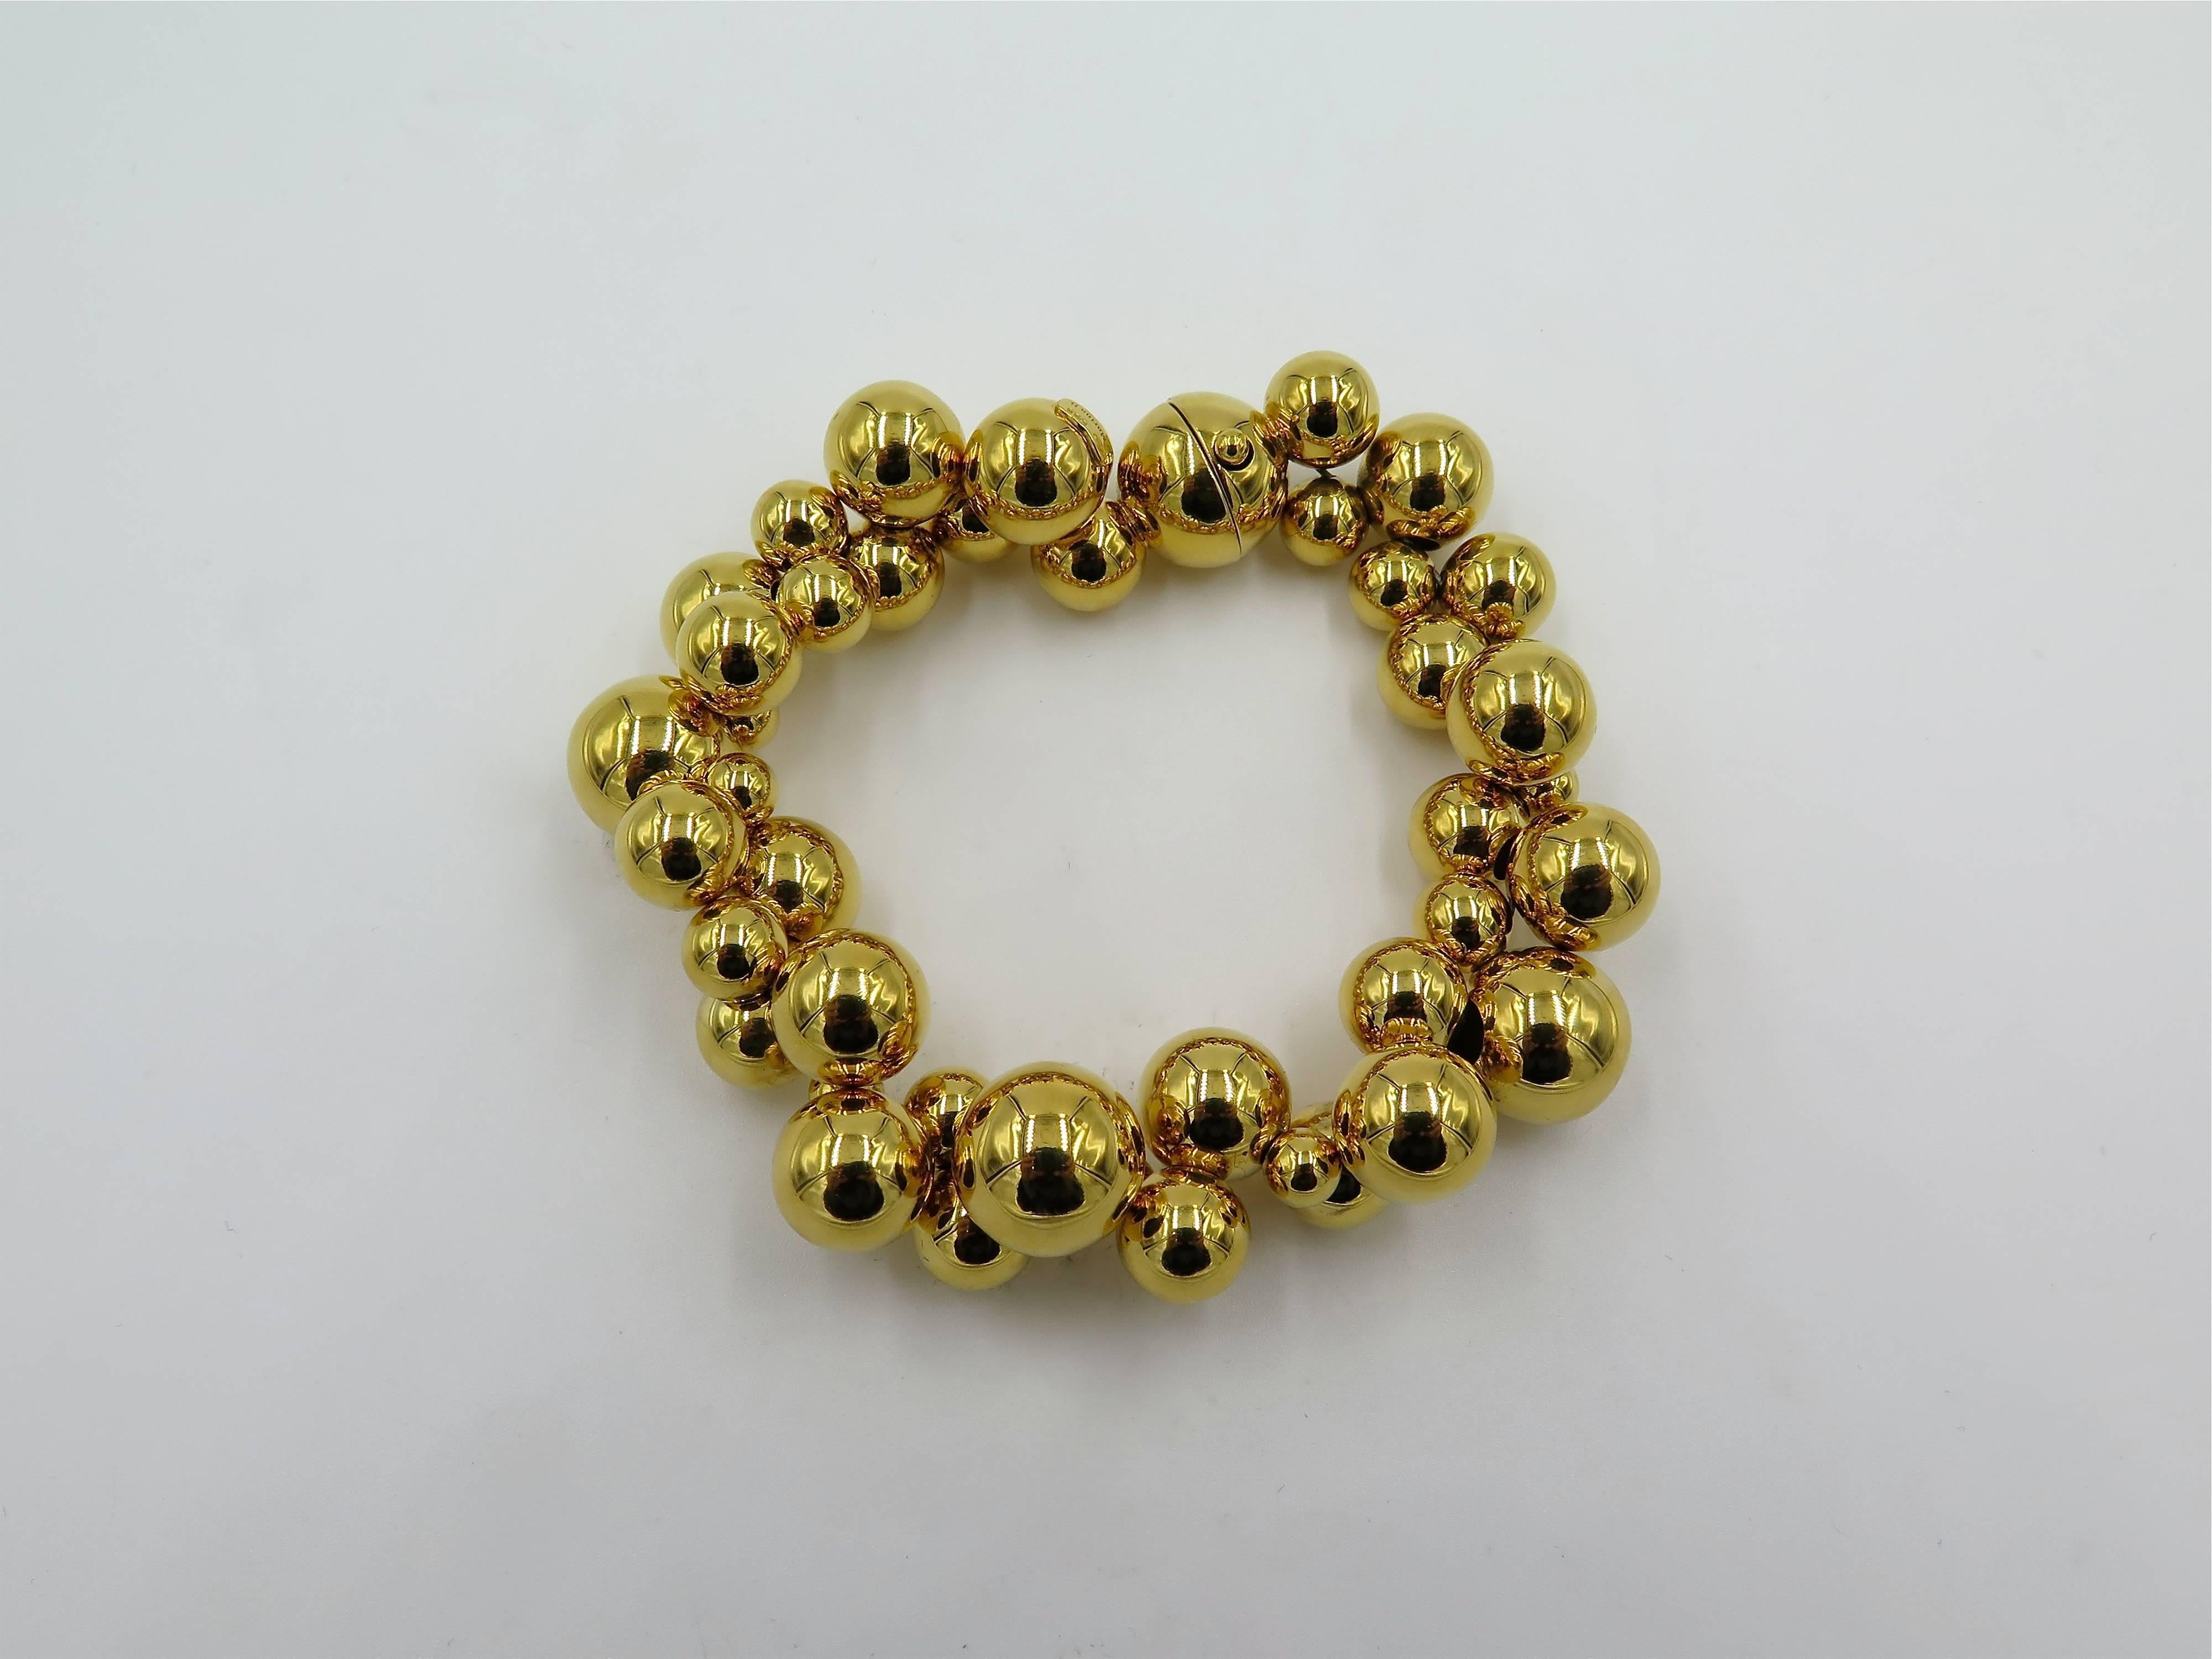 An 18 karat yellow gold Atomo bracelet. Marina B. Designed as a strand of variously sized polished gold beads. Length is approximately 7 1/2 inches. Gross weight is approximately 50.0 grams. With signed pouch. Stamped Marina B. Numbered 585001. 